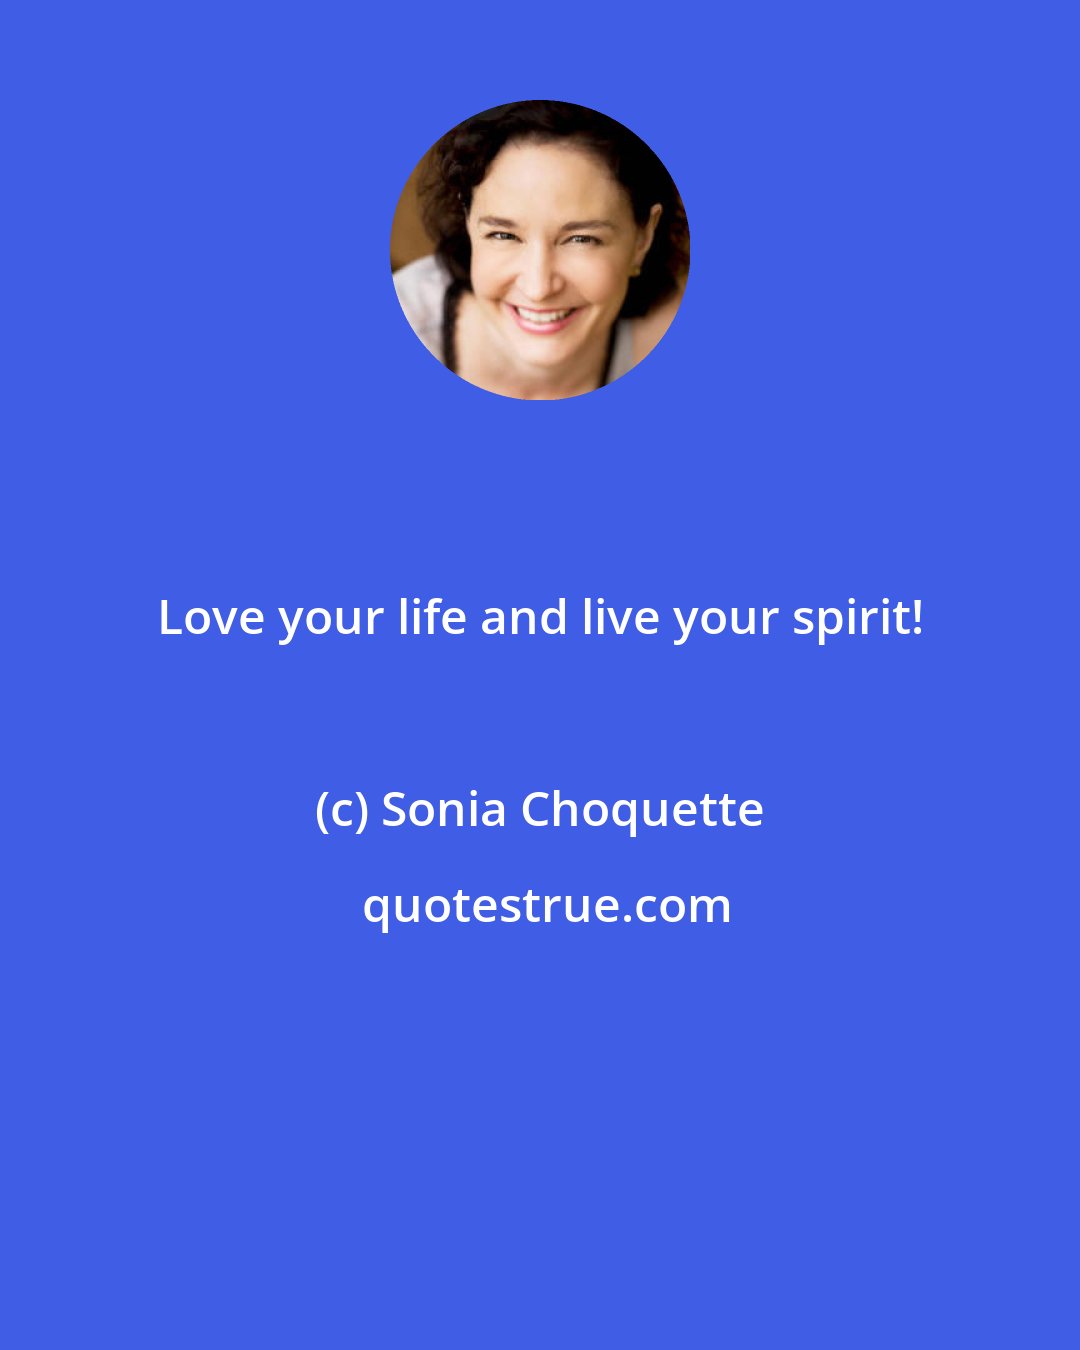 Sonia Choquette: Love your life and live your spirit!